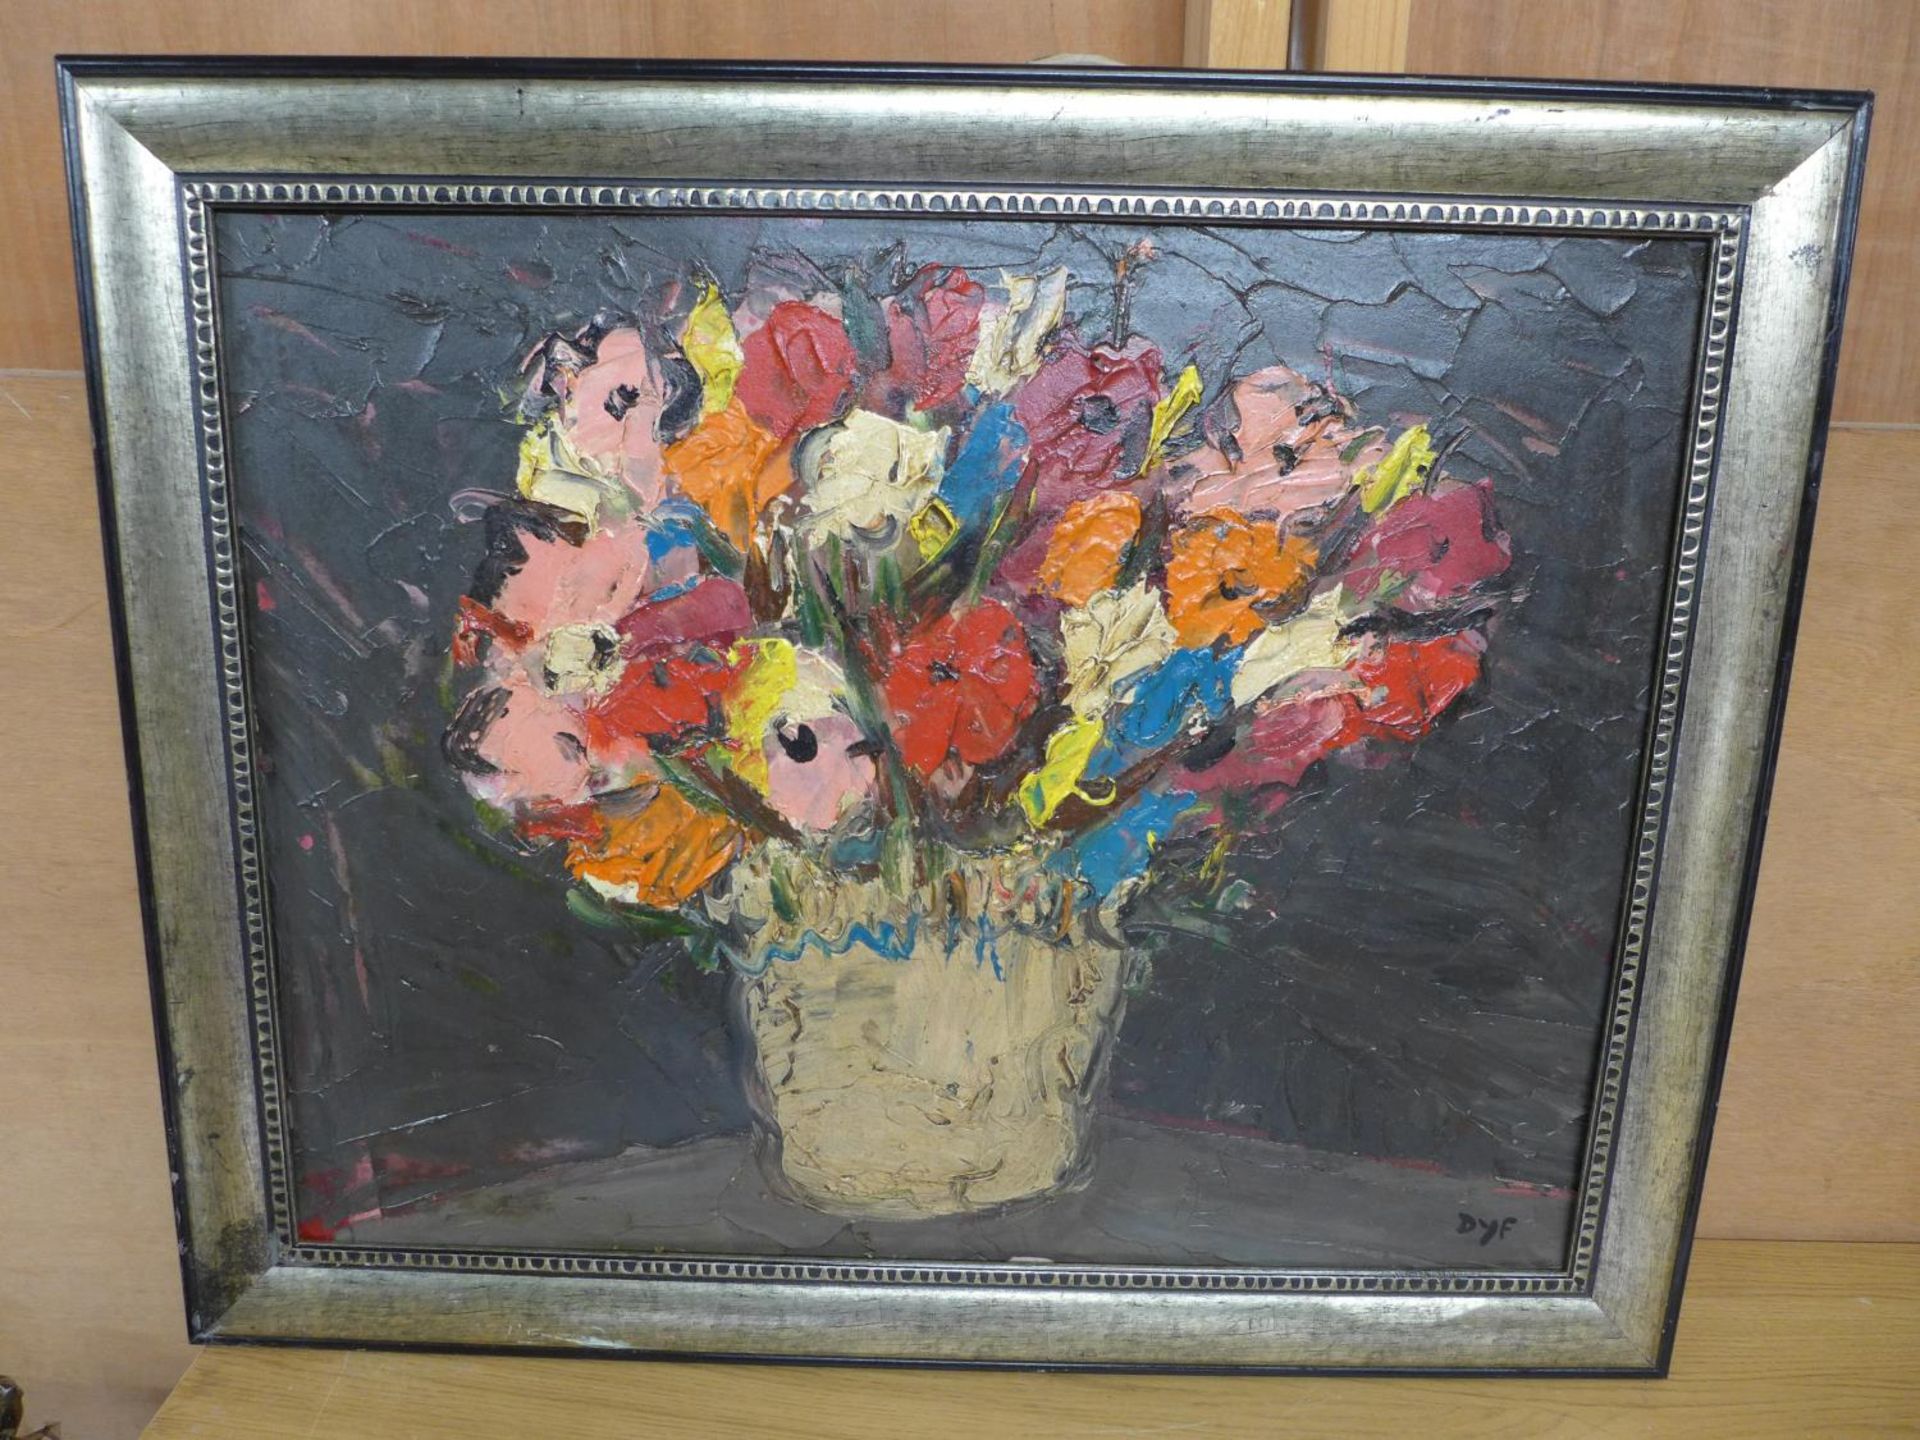 MANNER OF MARCEL DYF, STILL LIFE OF A VASE OF FLOWERS, OIL ON BOARD, BEARS A SIGNATURE DYF, 52X67CM,